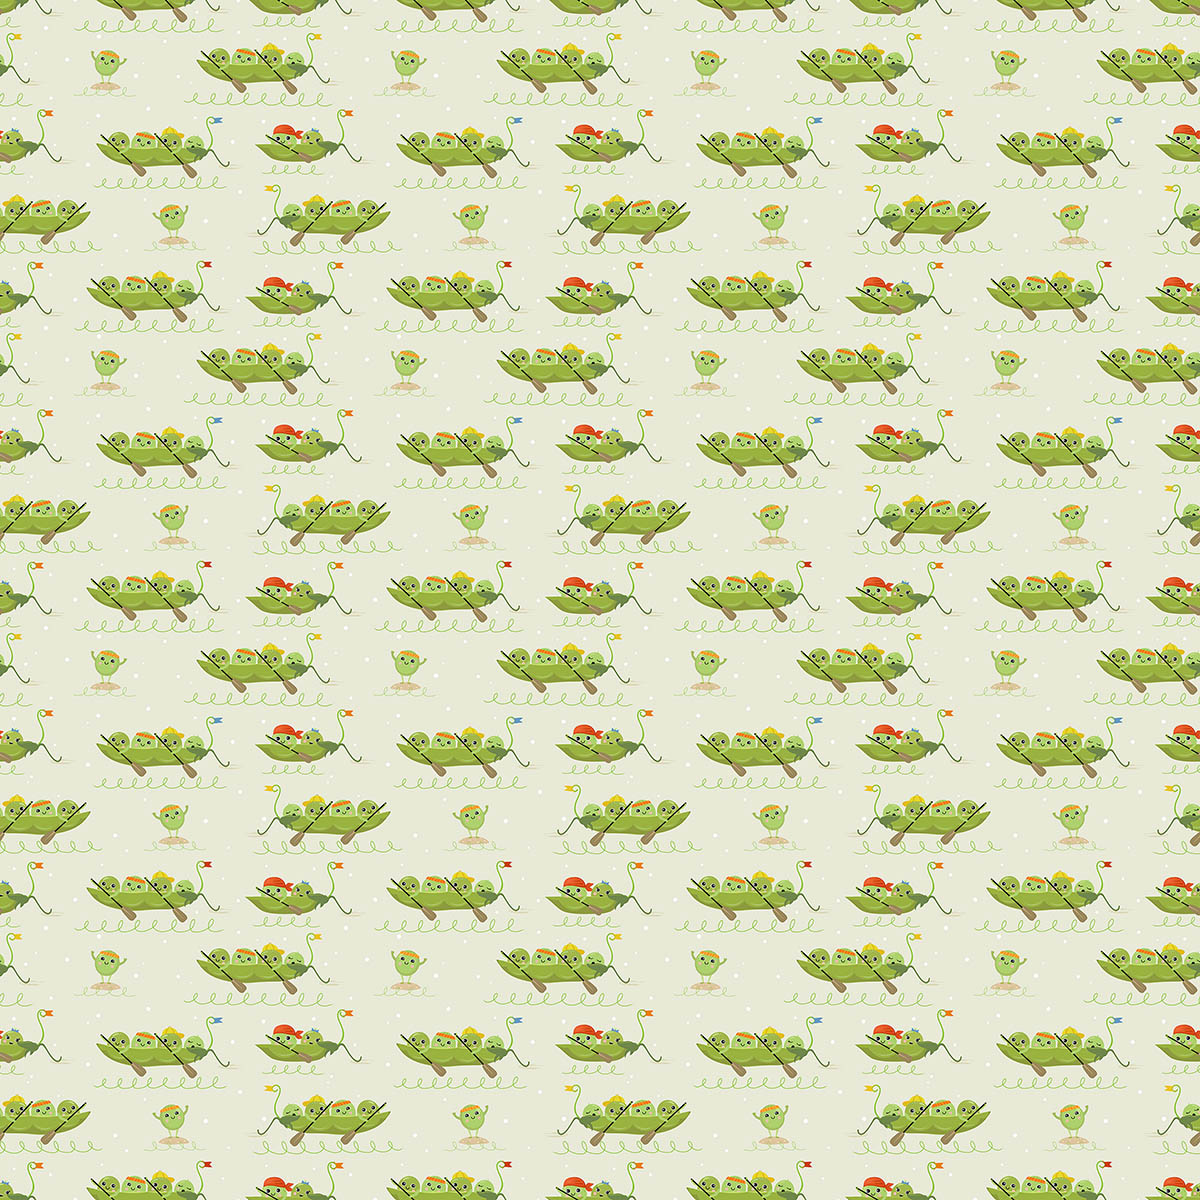 A seamless pattern of peas in a boat